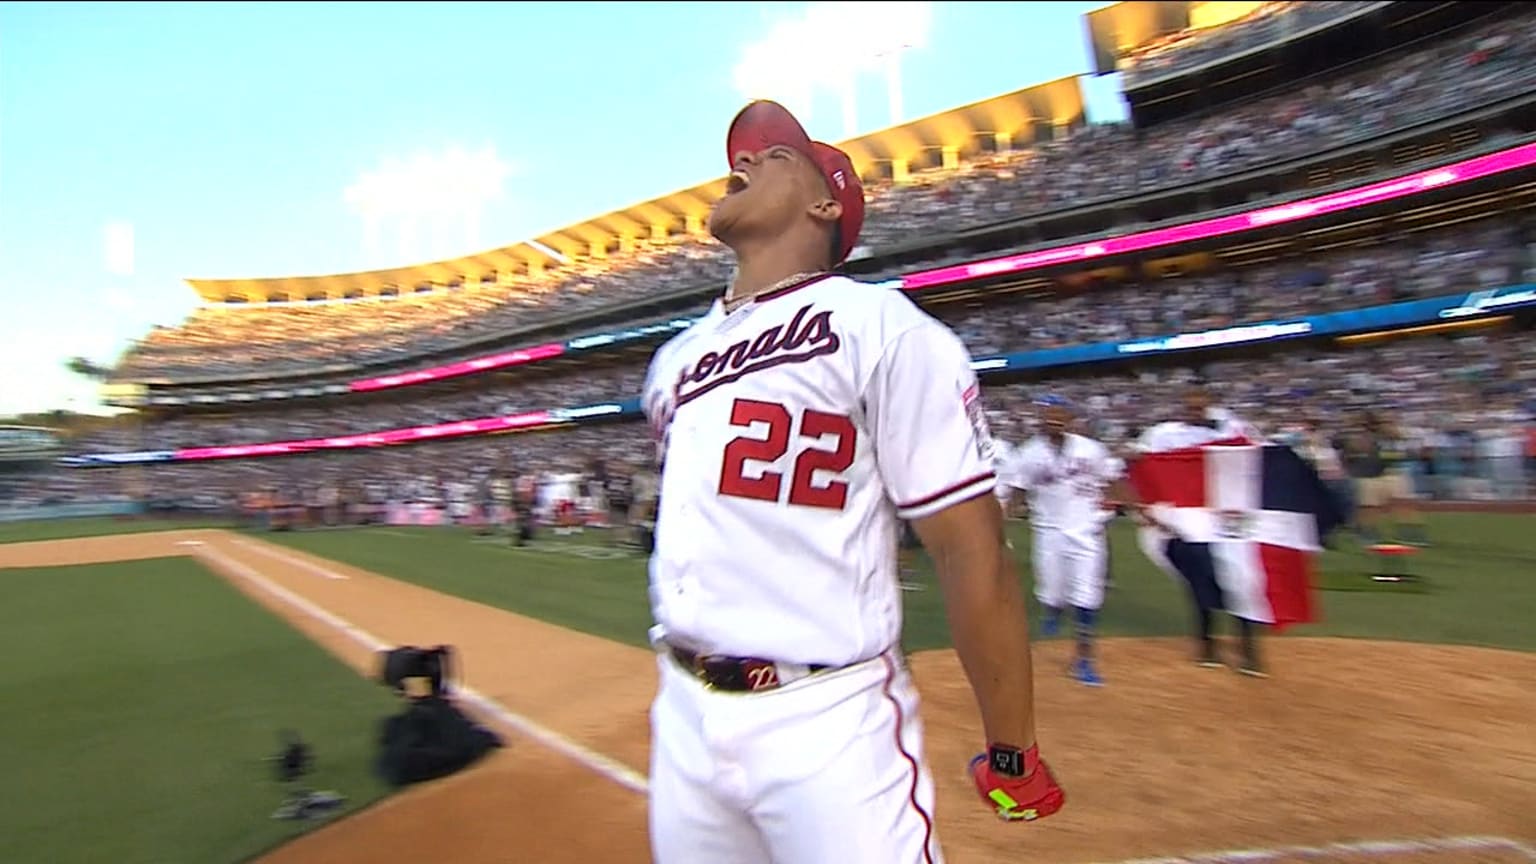 JUAN SOTO WINS THE 2022 HOME RUN DERBY 🏆 The two-time Silver Slugger now  has the HR Derby crown!